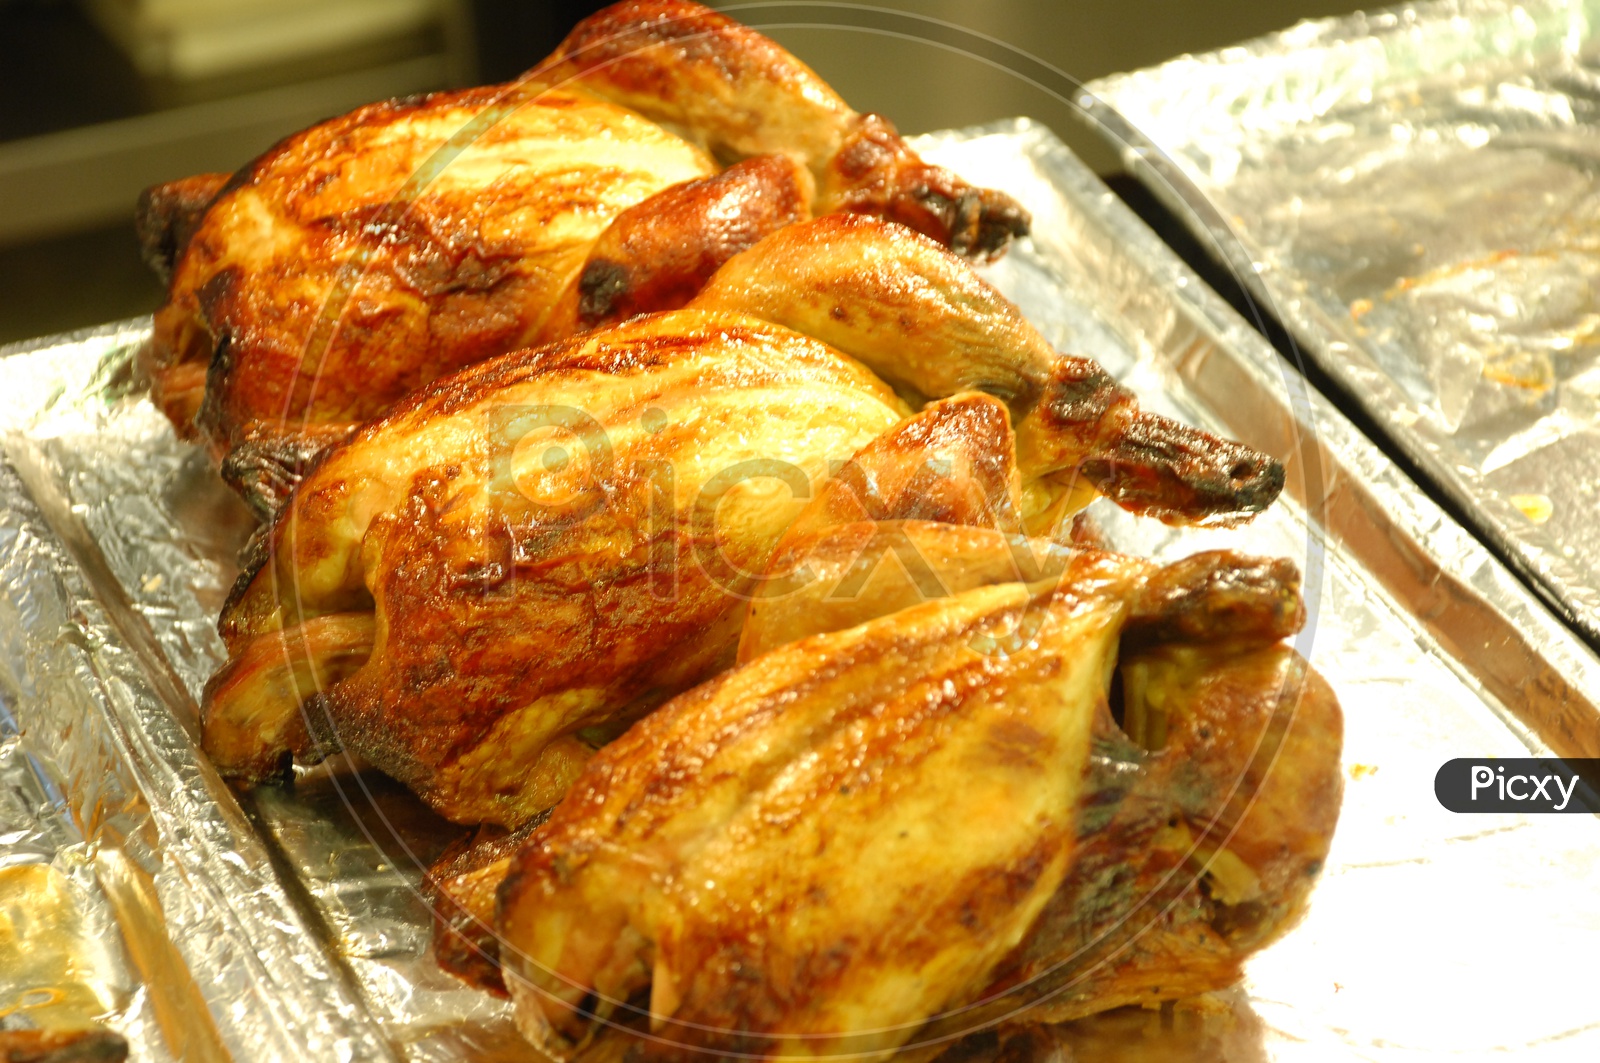 Close up shot of a roasted chicken placed in aluminum foil lined tray